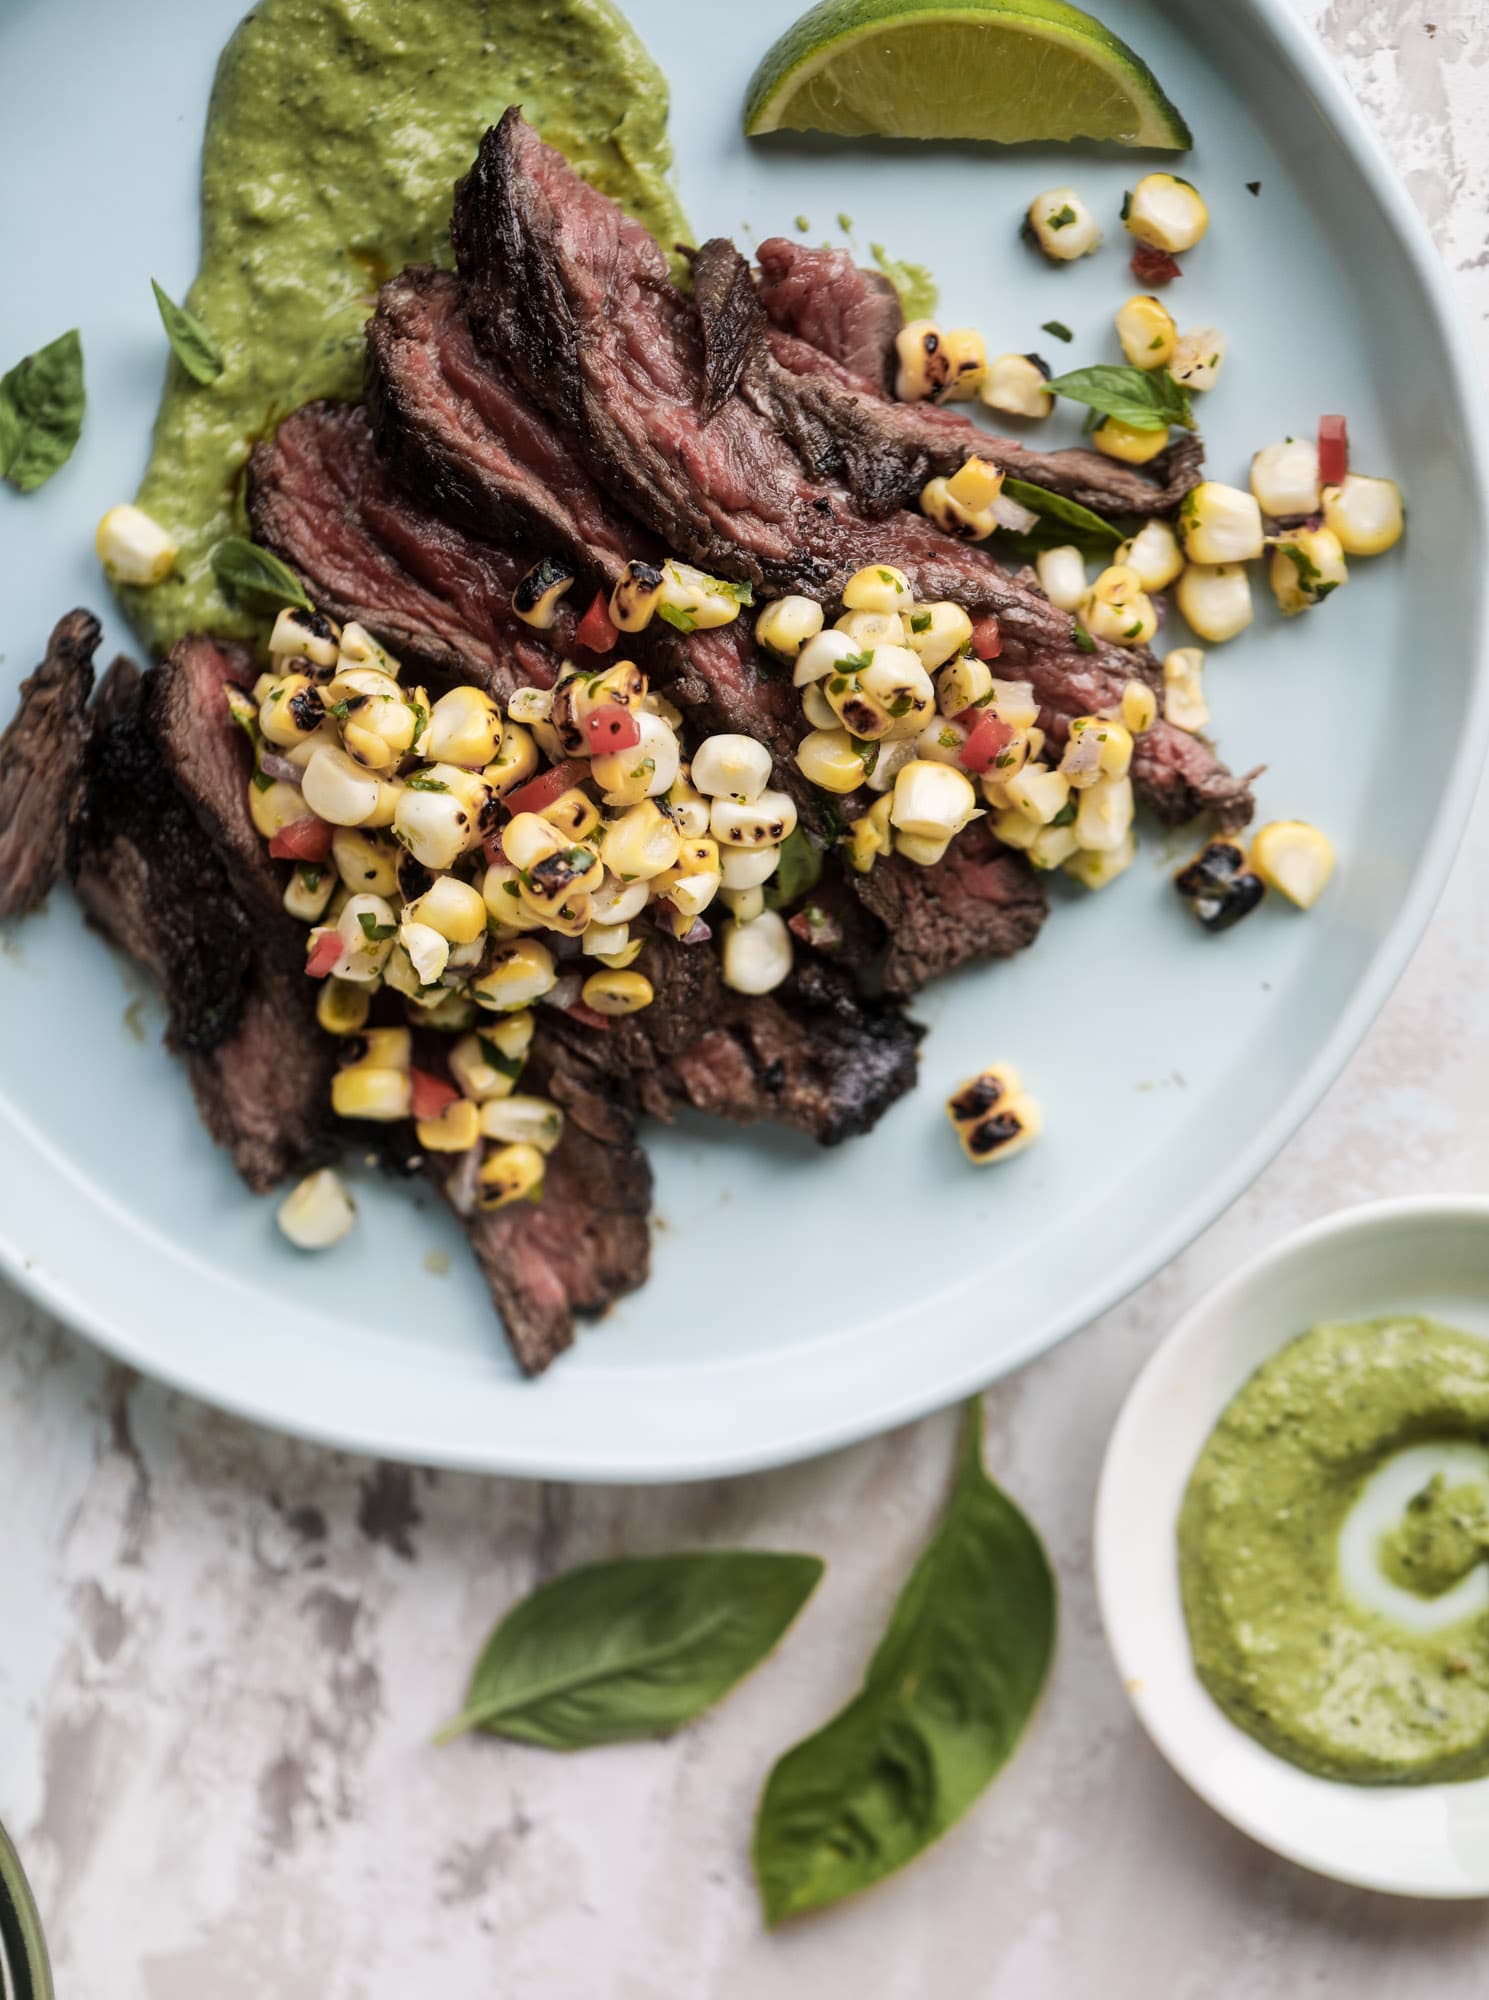 This skirt steak recipe is so super easy and delicious! Marinate it for a bit, prepare it to your liking then serve it with the most flavorful avocado pesto and grilled corn relish. Feels like a fancy restaurant meal and will make you love skirt steak forever! I howsweeteats.com #skirt #steak #avocado #pesto #corn #relish #recipes